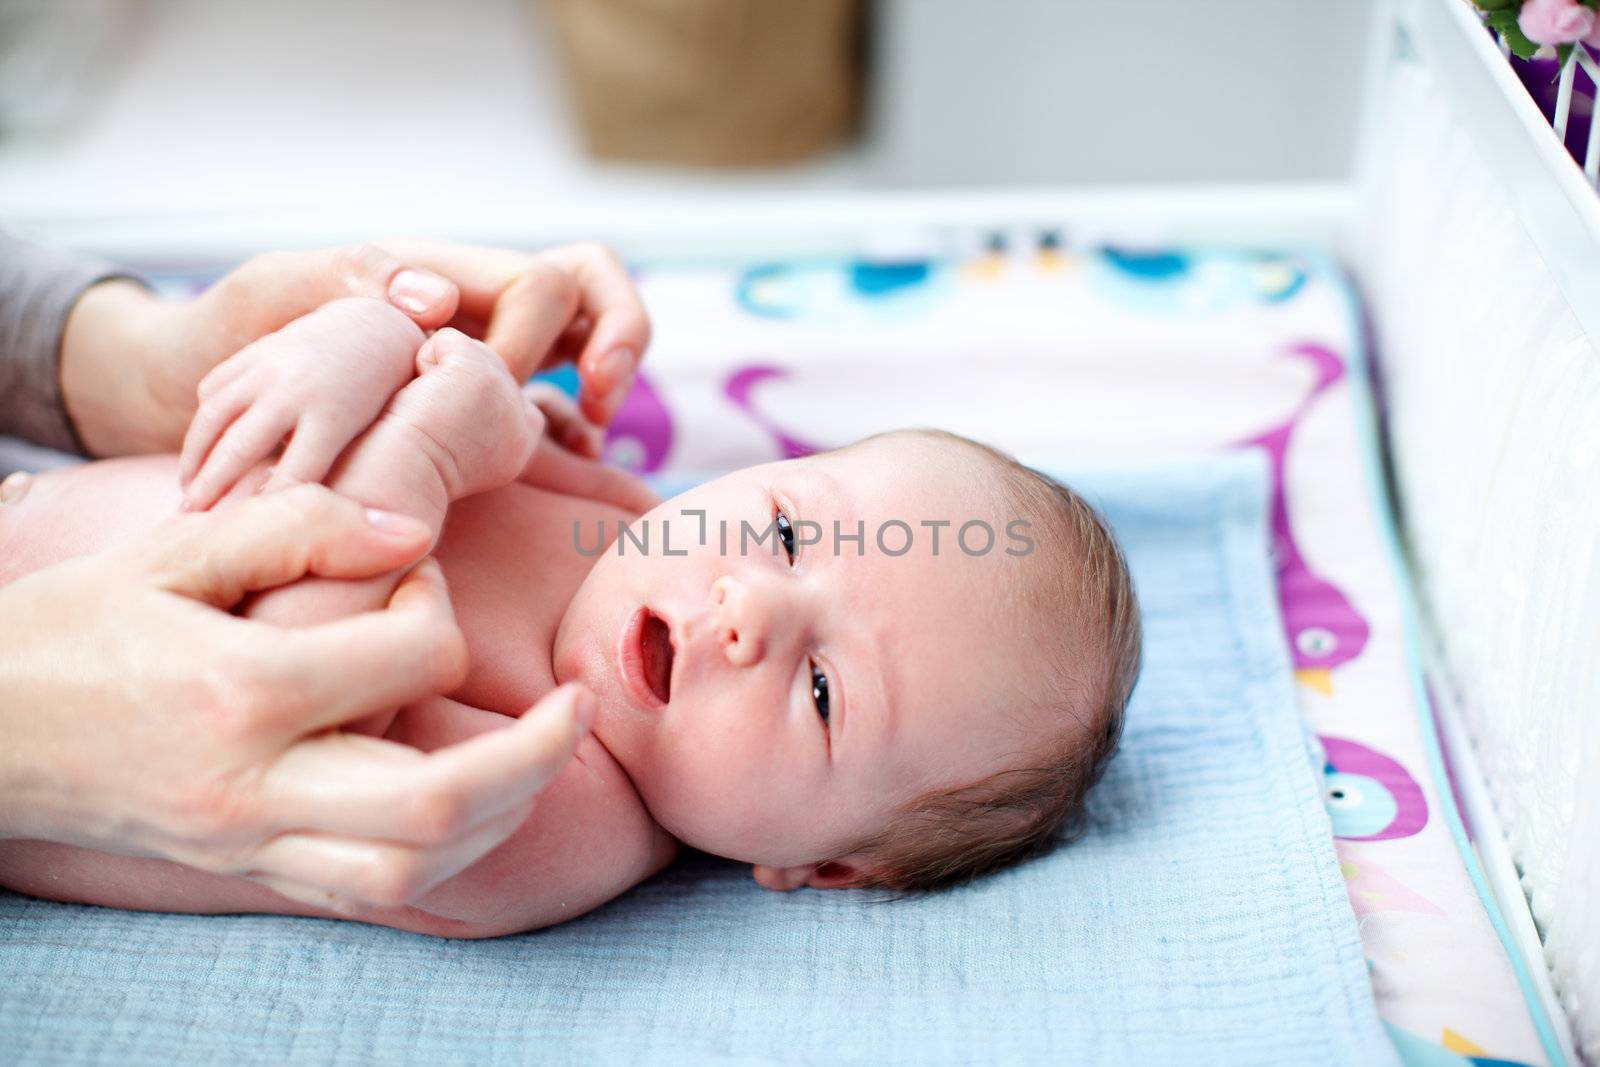 Cute sleepy newborn baby gazing at the camera as it lies on its back in the nursery cradled by the hands of the mother